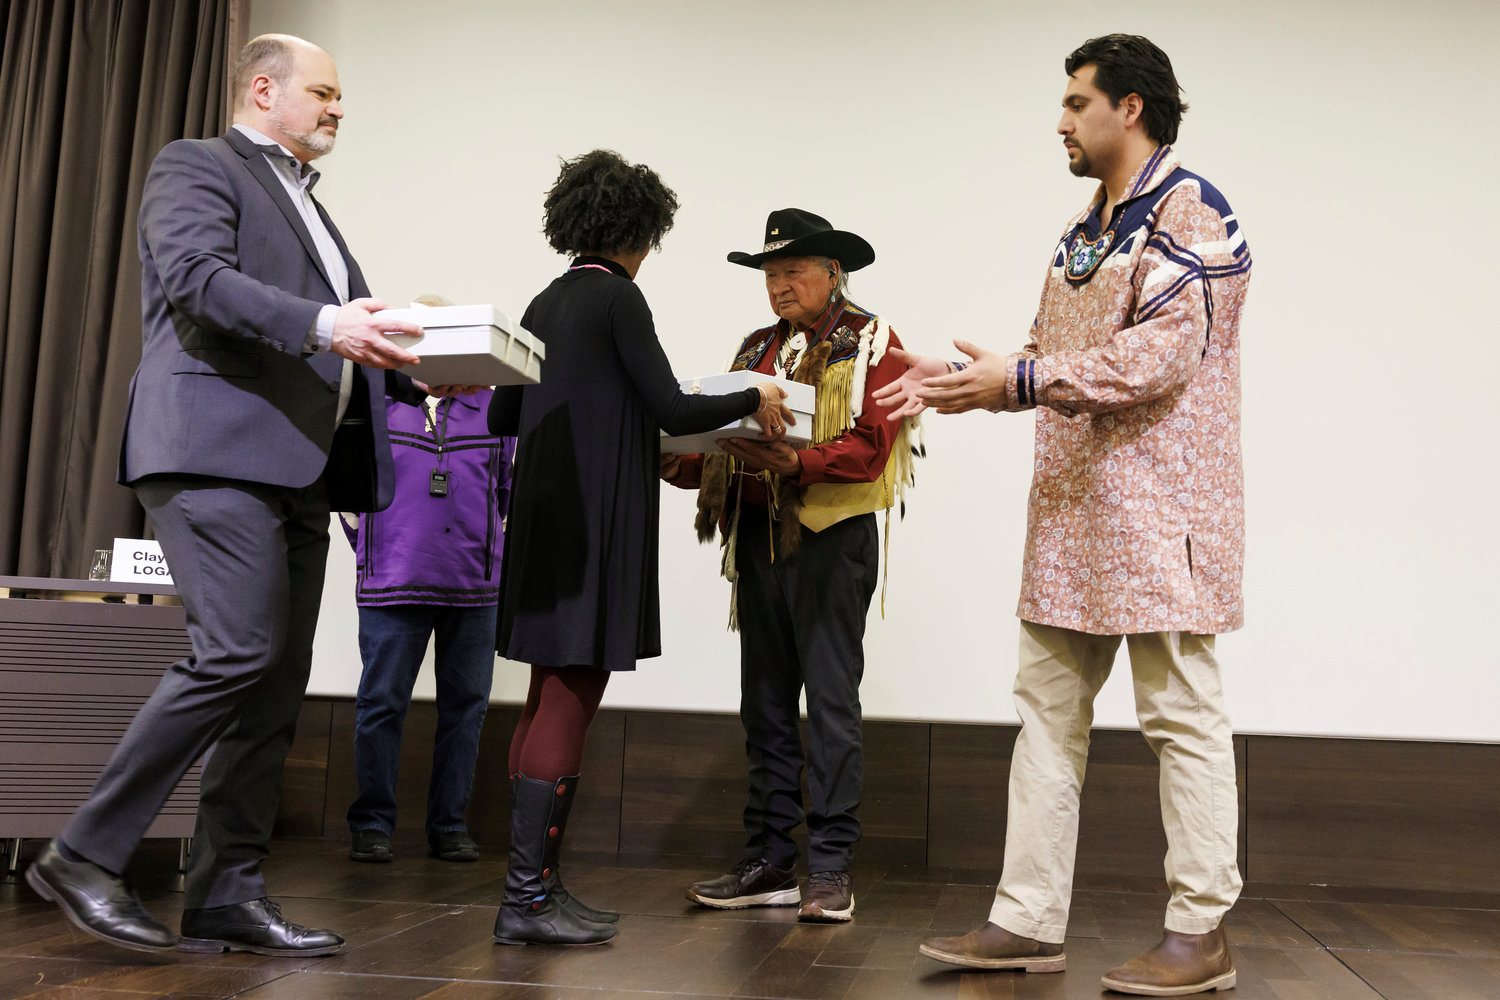 Sami Kanaan, left, Administrative Councillor of the City of Geneva, and Carine Ayele Durand, 2nd left, Director of the Museum of Ethnography of Geneva (MEG), give boxes containing sacred objects to representatives of Haudenosaunee Confederation Clayton Logan (Seneca Nation), 2nd right, and Brennen Ferguson (Tuscarora Nation), right, during the ceremony of restitution of sacred object to the Haudenosaunee Confederation, at the Museum of Ethnography of Geneva (MEG), in Geneva, Switzerland, Tuesday, February 7, 2023. The MEG has returned traditional sacred objects, a mask and a rattle, to the Haudenosaunee after 200 years in Switzerland. 

The Iroquois (/ˈɪrəkwɔɪ/ or /ˈɪrəkwɑː/), officially the Haudenosaunee (/ˌhoʊdinoʊˈʃoʊniː/[3][4] meaning "people who are building the longhouse"), are an Iroquoian-speaking confederacy of First Nations peoples in northeast North America/Turtle Island. They were known during the colonial years to the French as the Iroquois League, and later as the Iroquois Confederacy. The English called them the Five Nations, comprising the Mohawk, Oneida, Onondaga, Cayuga, and Seneca (listed geographically from east to west). After 1722, the Iroquoian-speaking Tuscarora people from the southeast were accepted into the confederacy, which became known as the Six Nations.